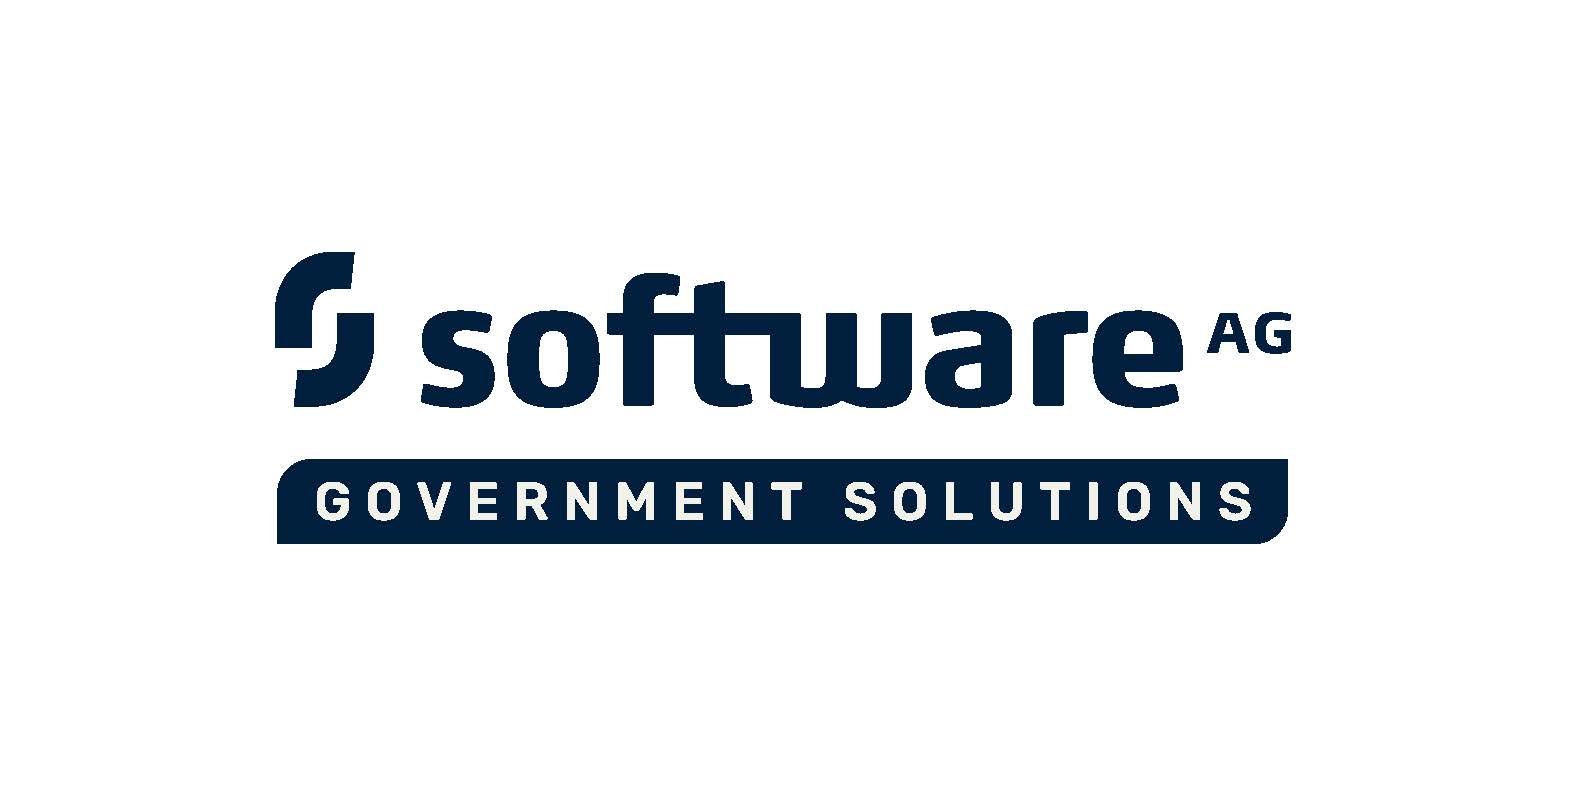 Software AG Government Solutions logo